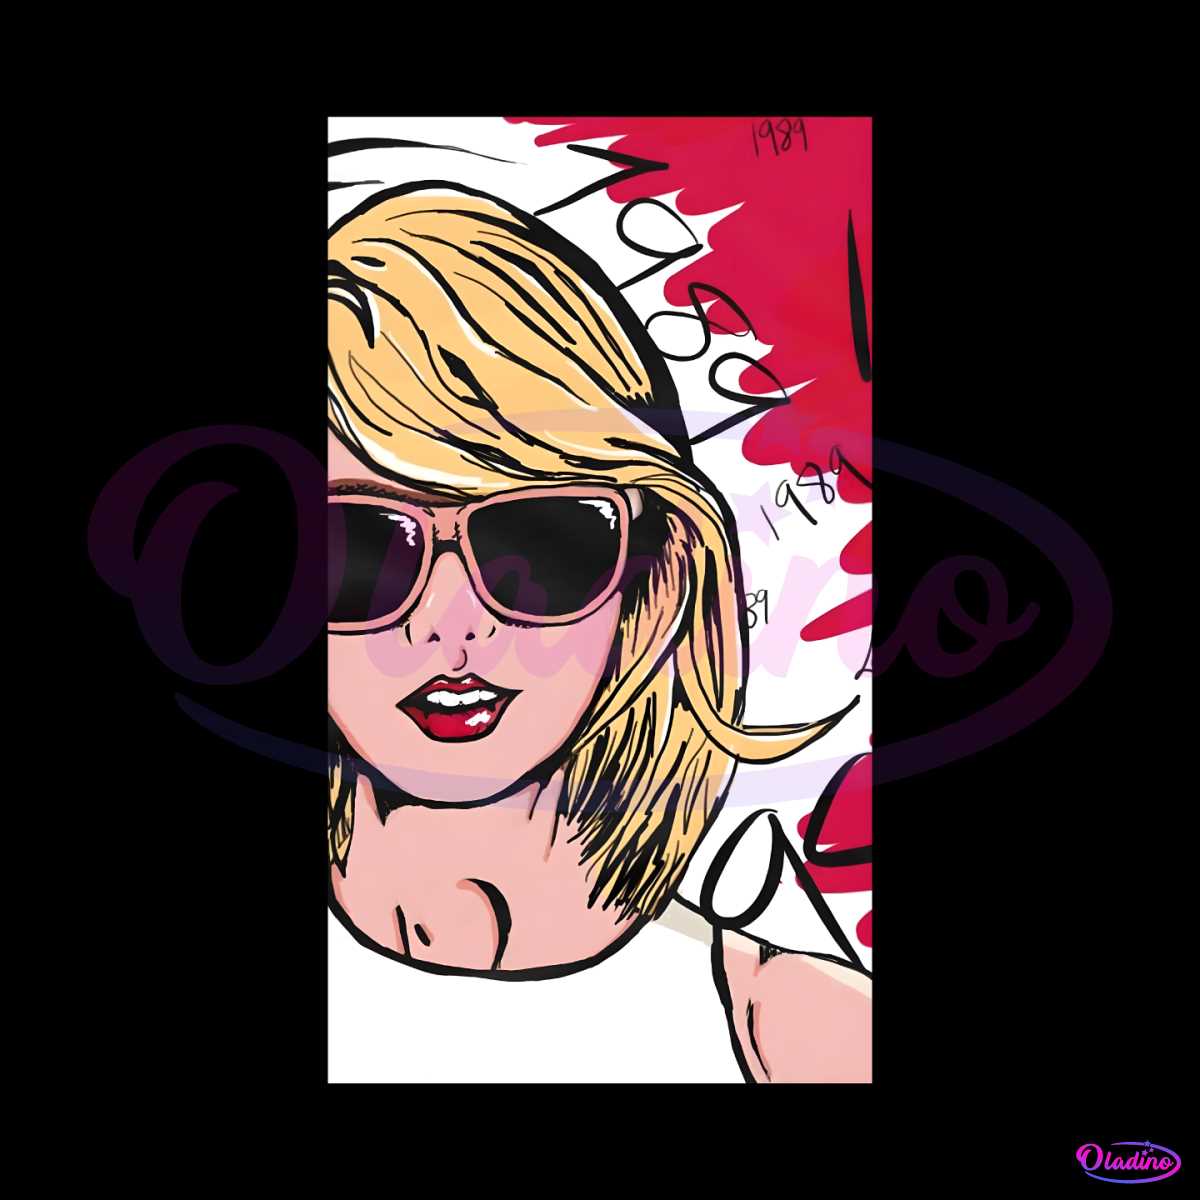 1989-taylors-version-new-recorded-album-png